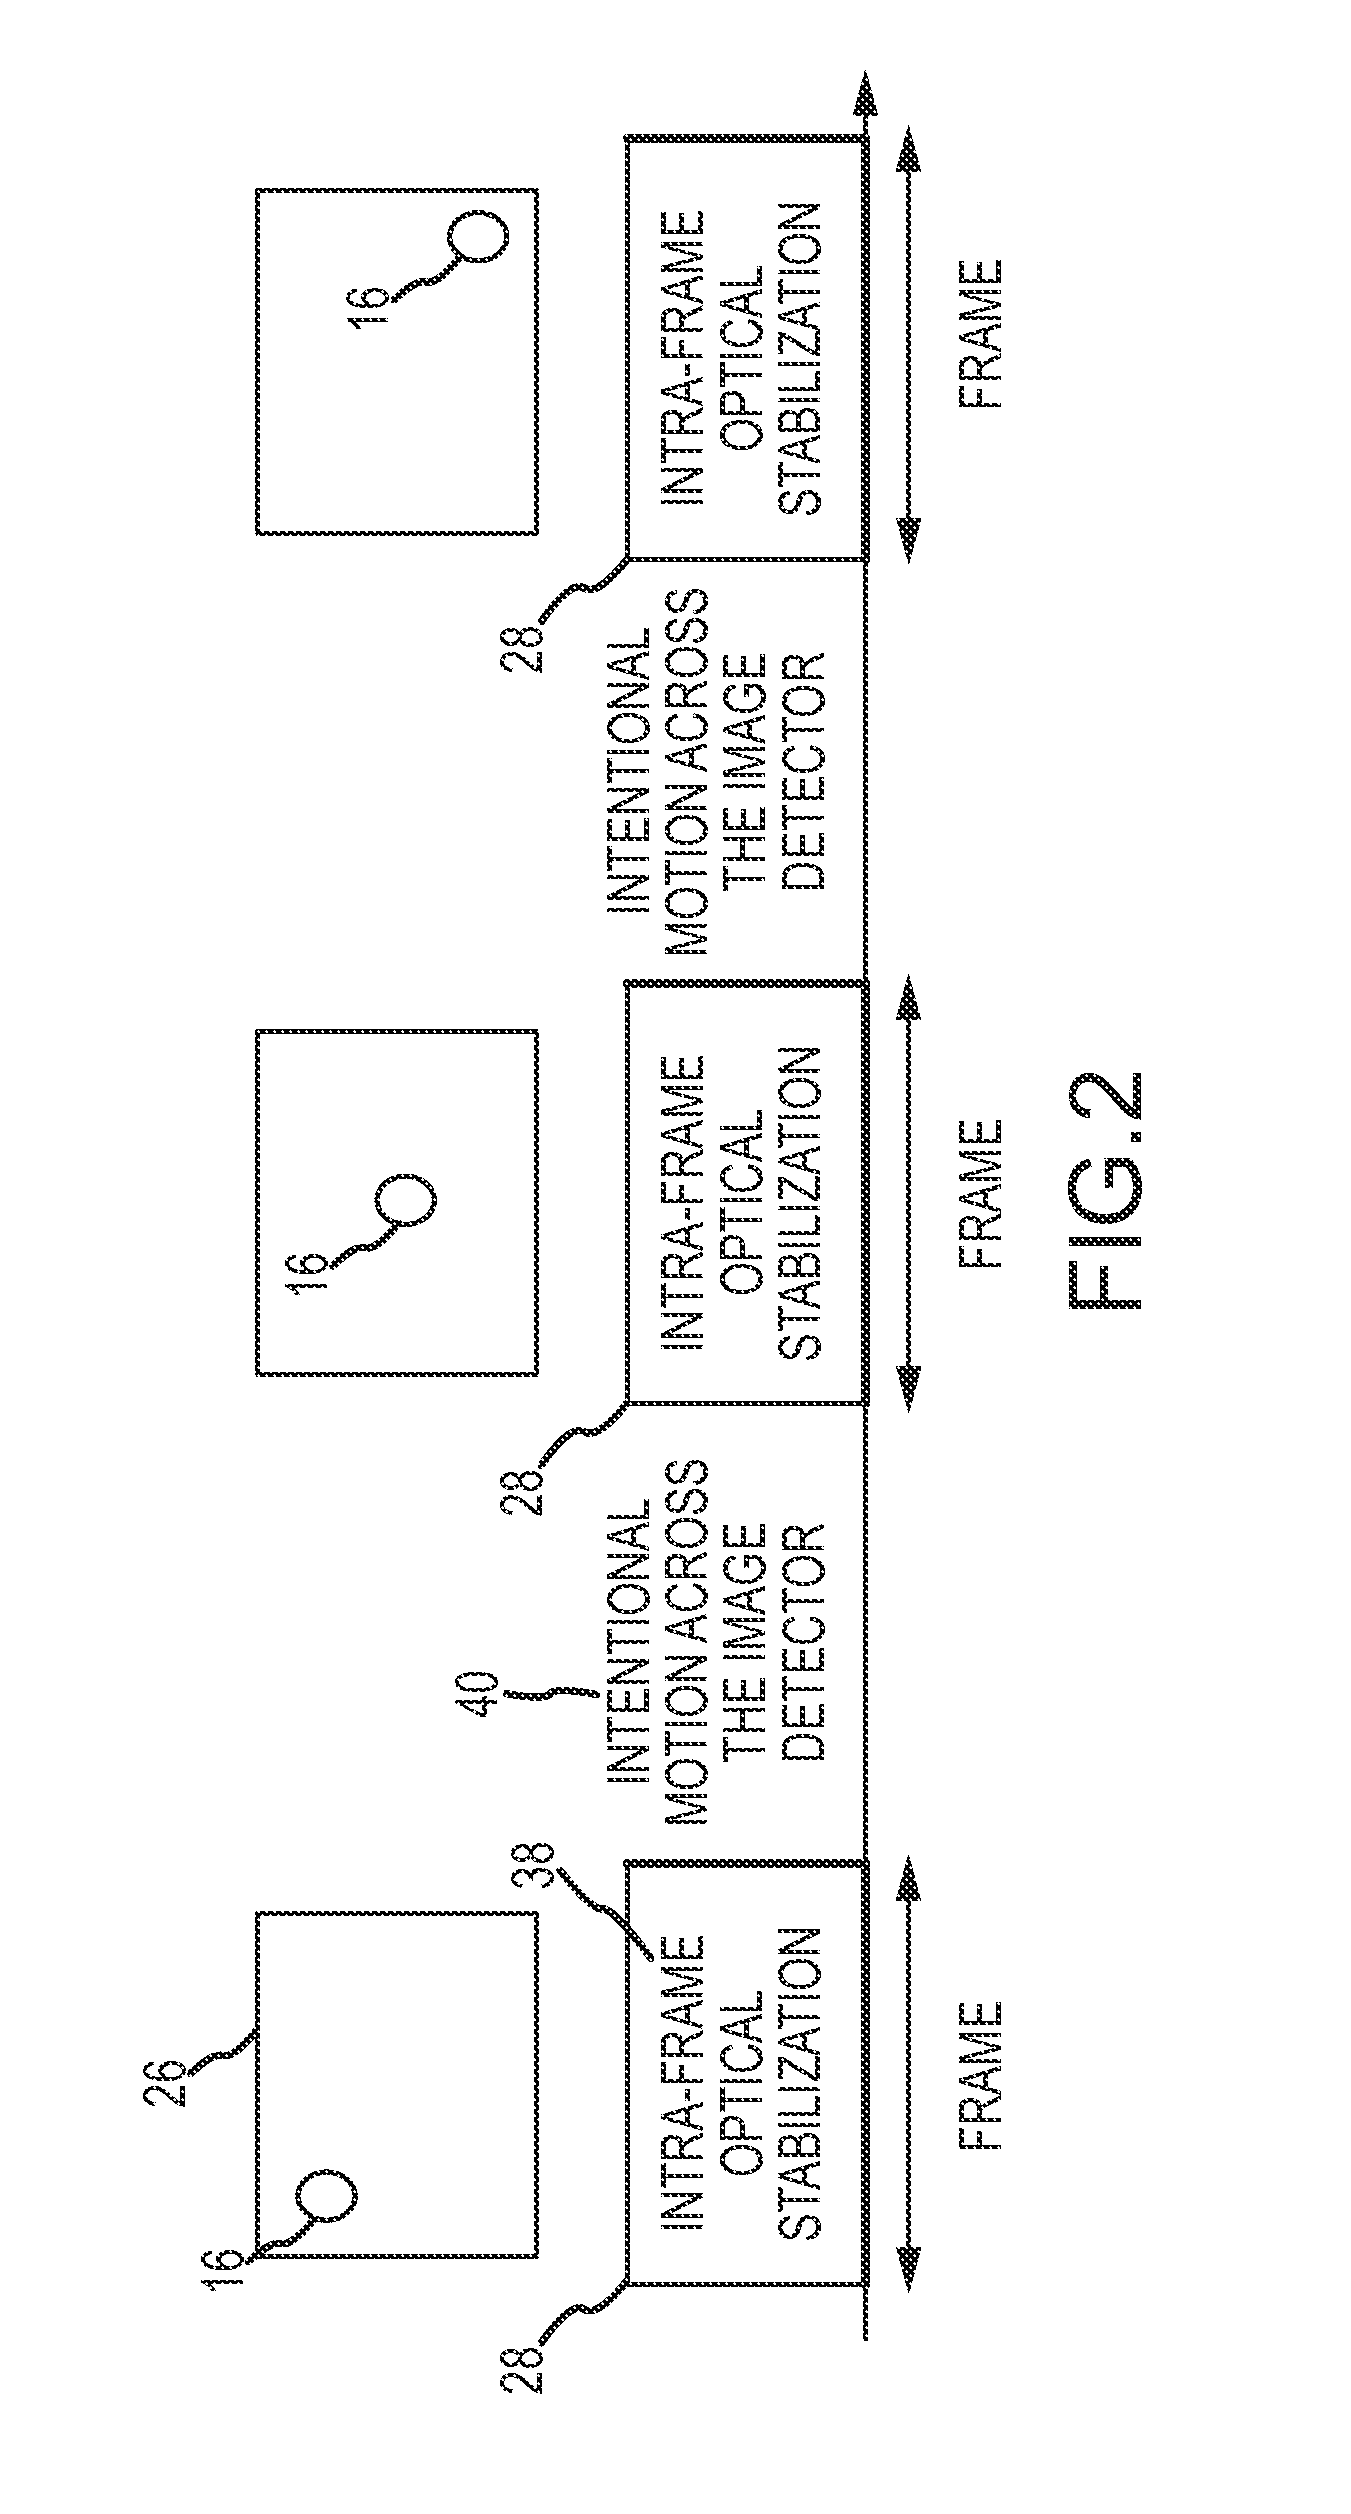 Intra-frame optical-stabilization with intentional inter-frame scene motion